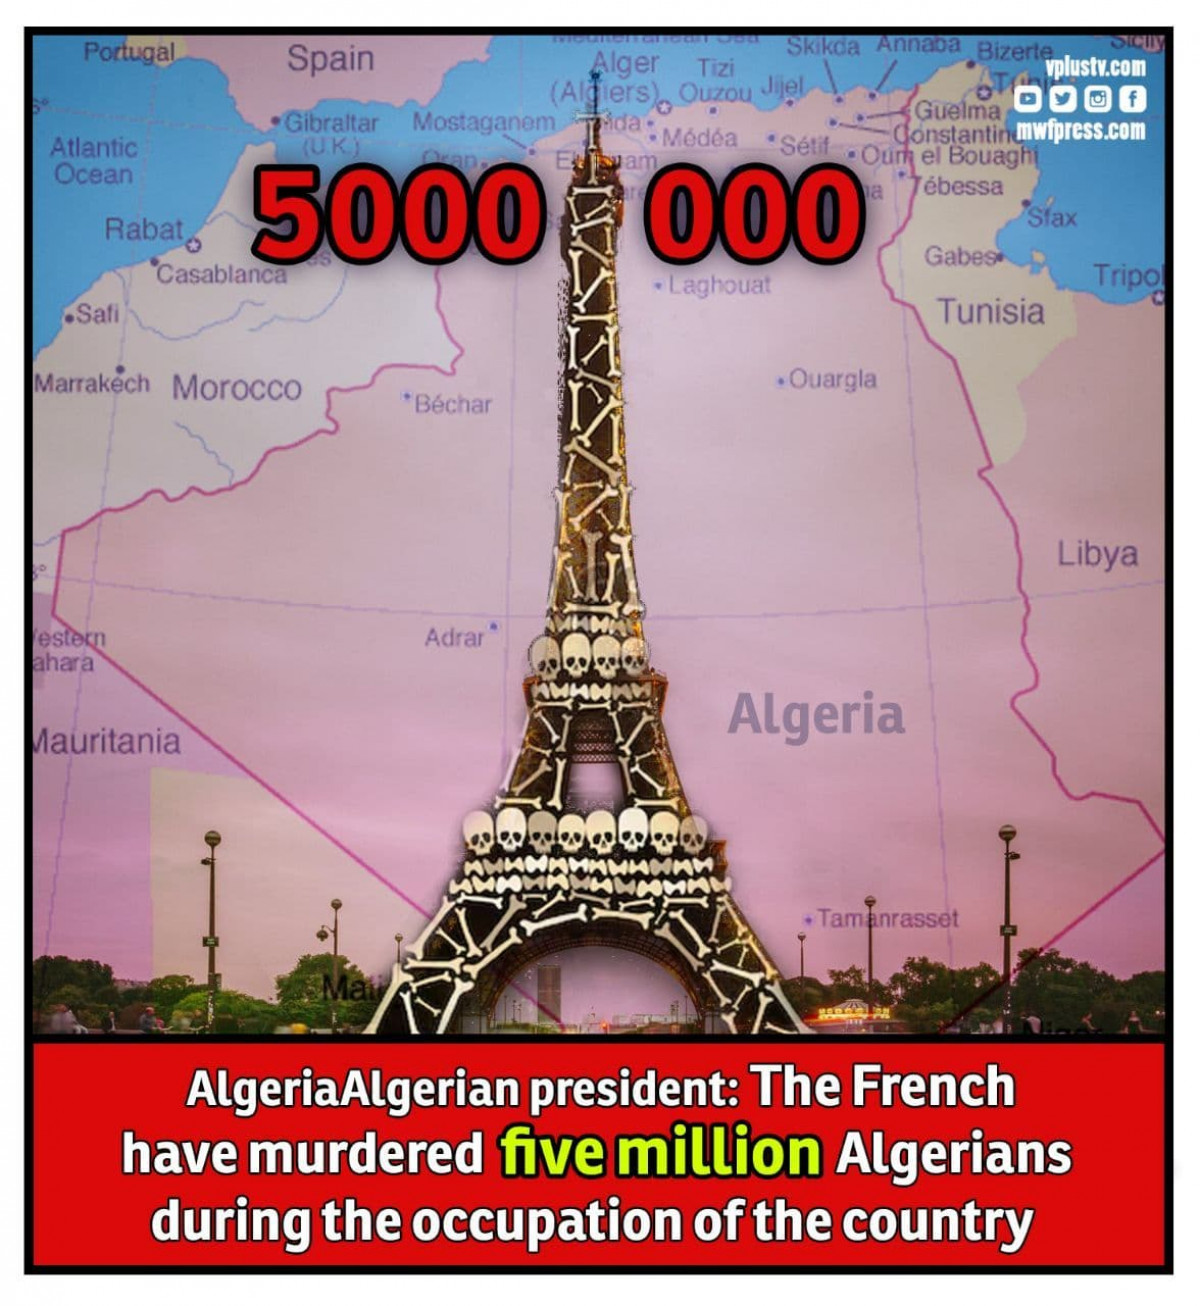 Algerian president: The French have murdered five million Algerians during the occupation of the country